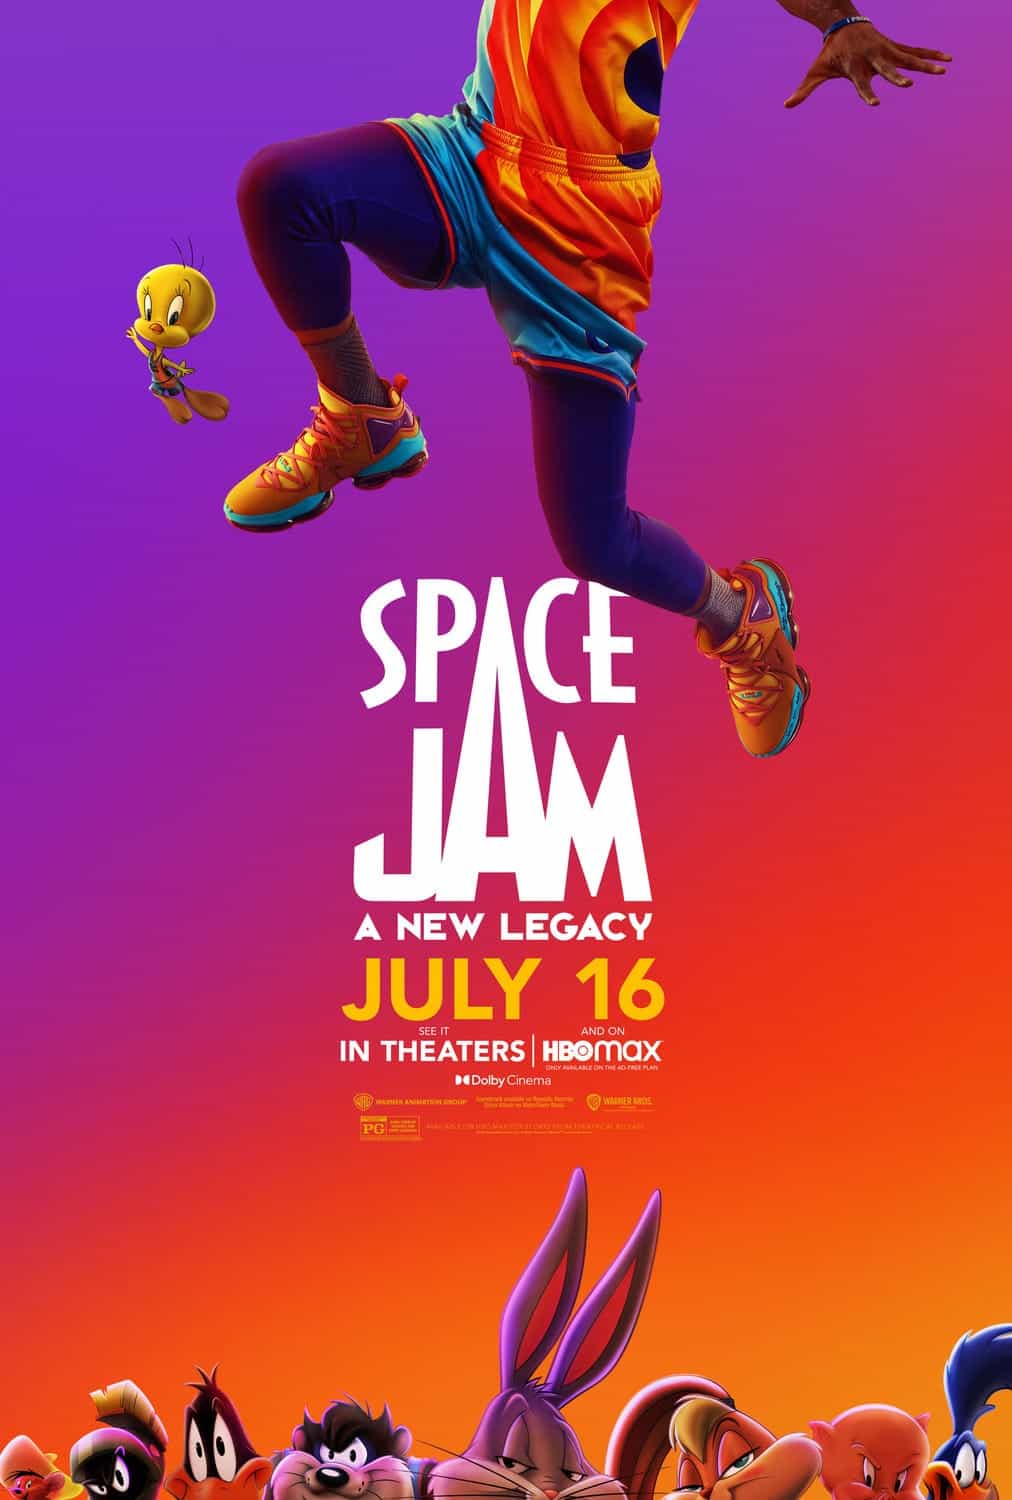 Space Jam: A New Legacy is given a U age rating for very mild slapstick, language